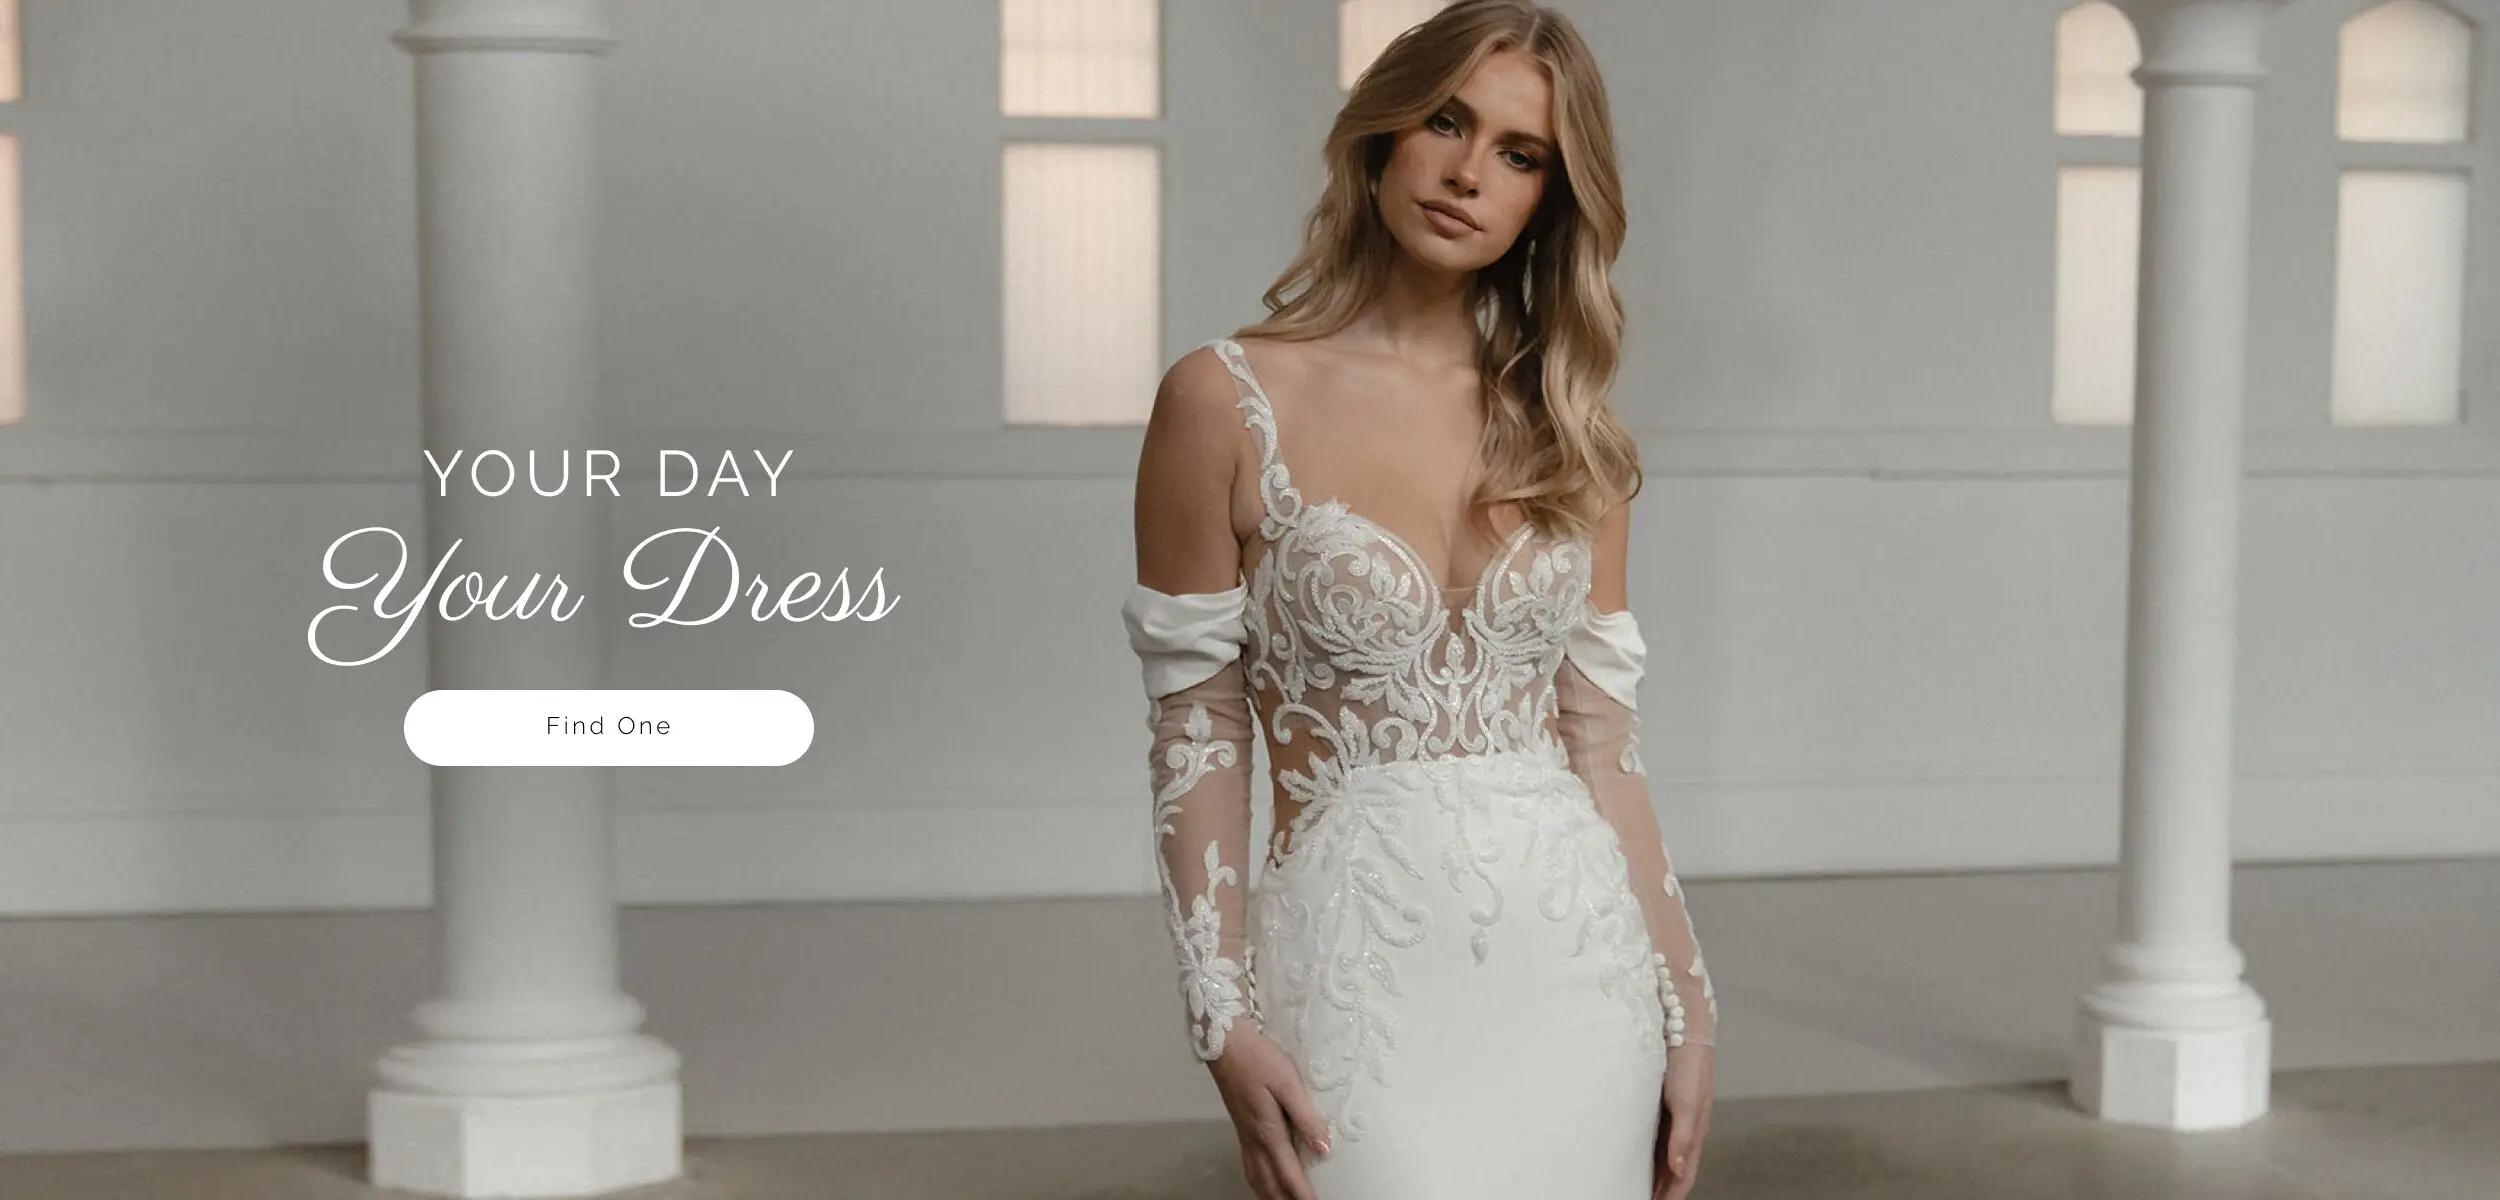 Desktop Your Day Your Dress Banner